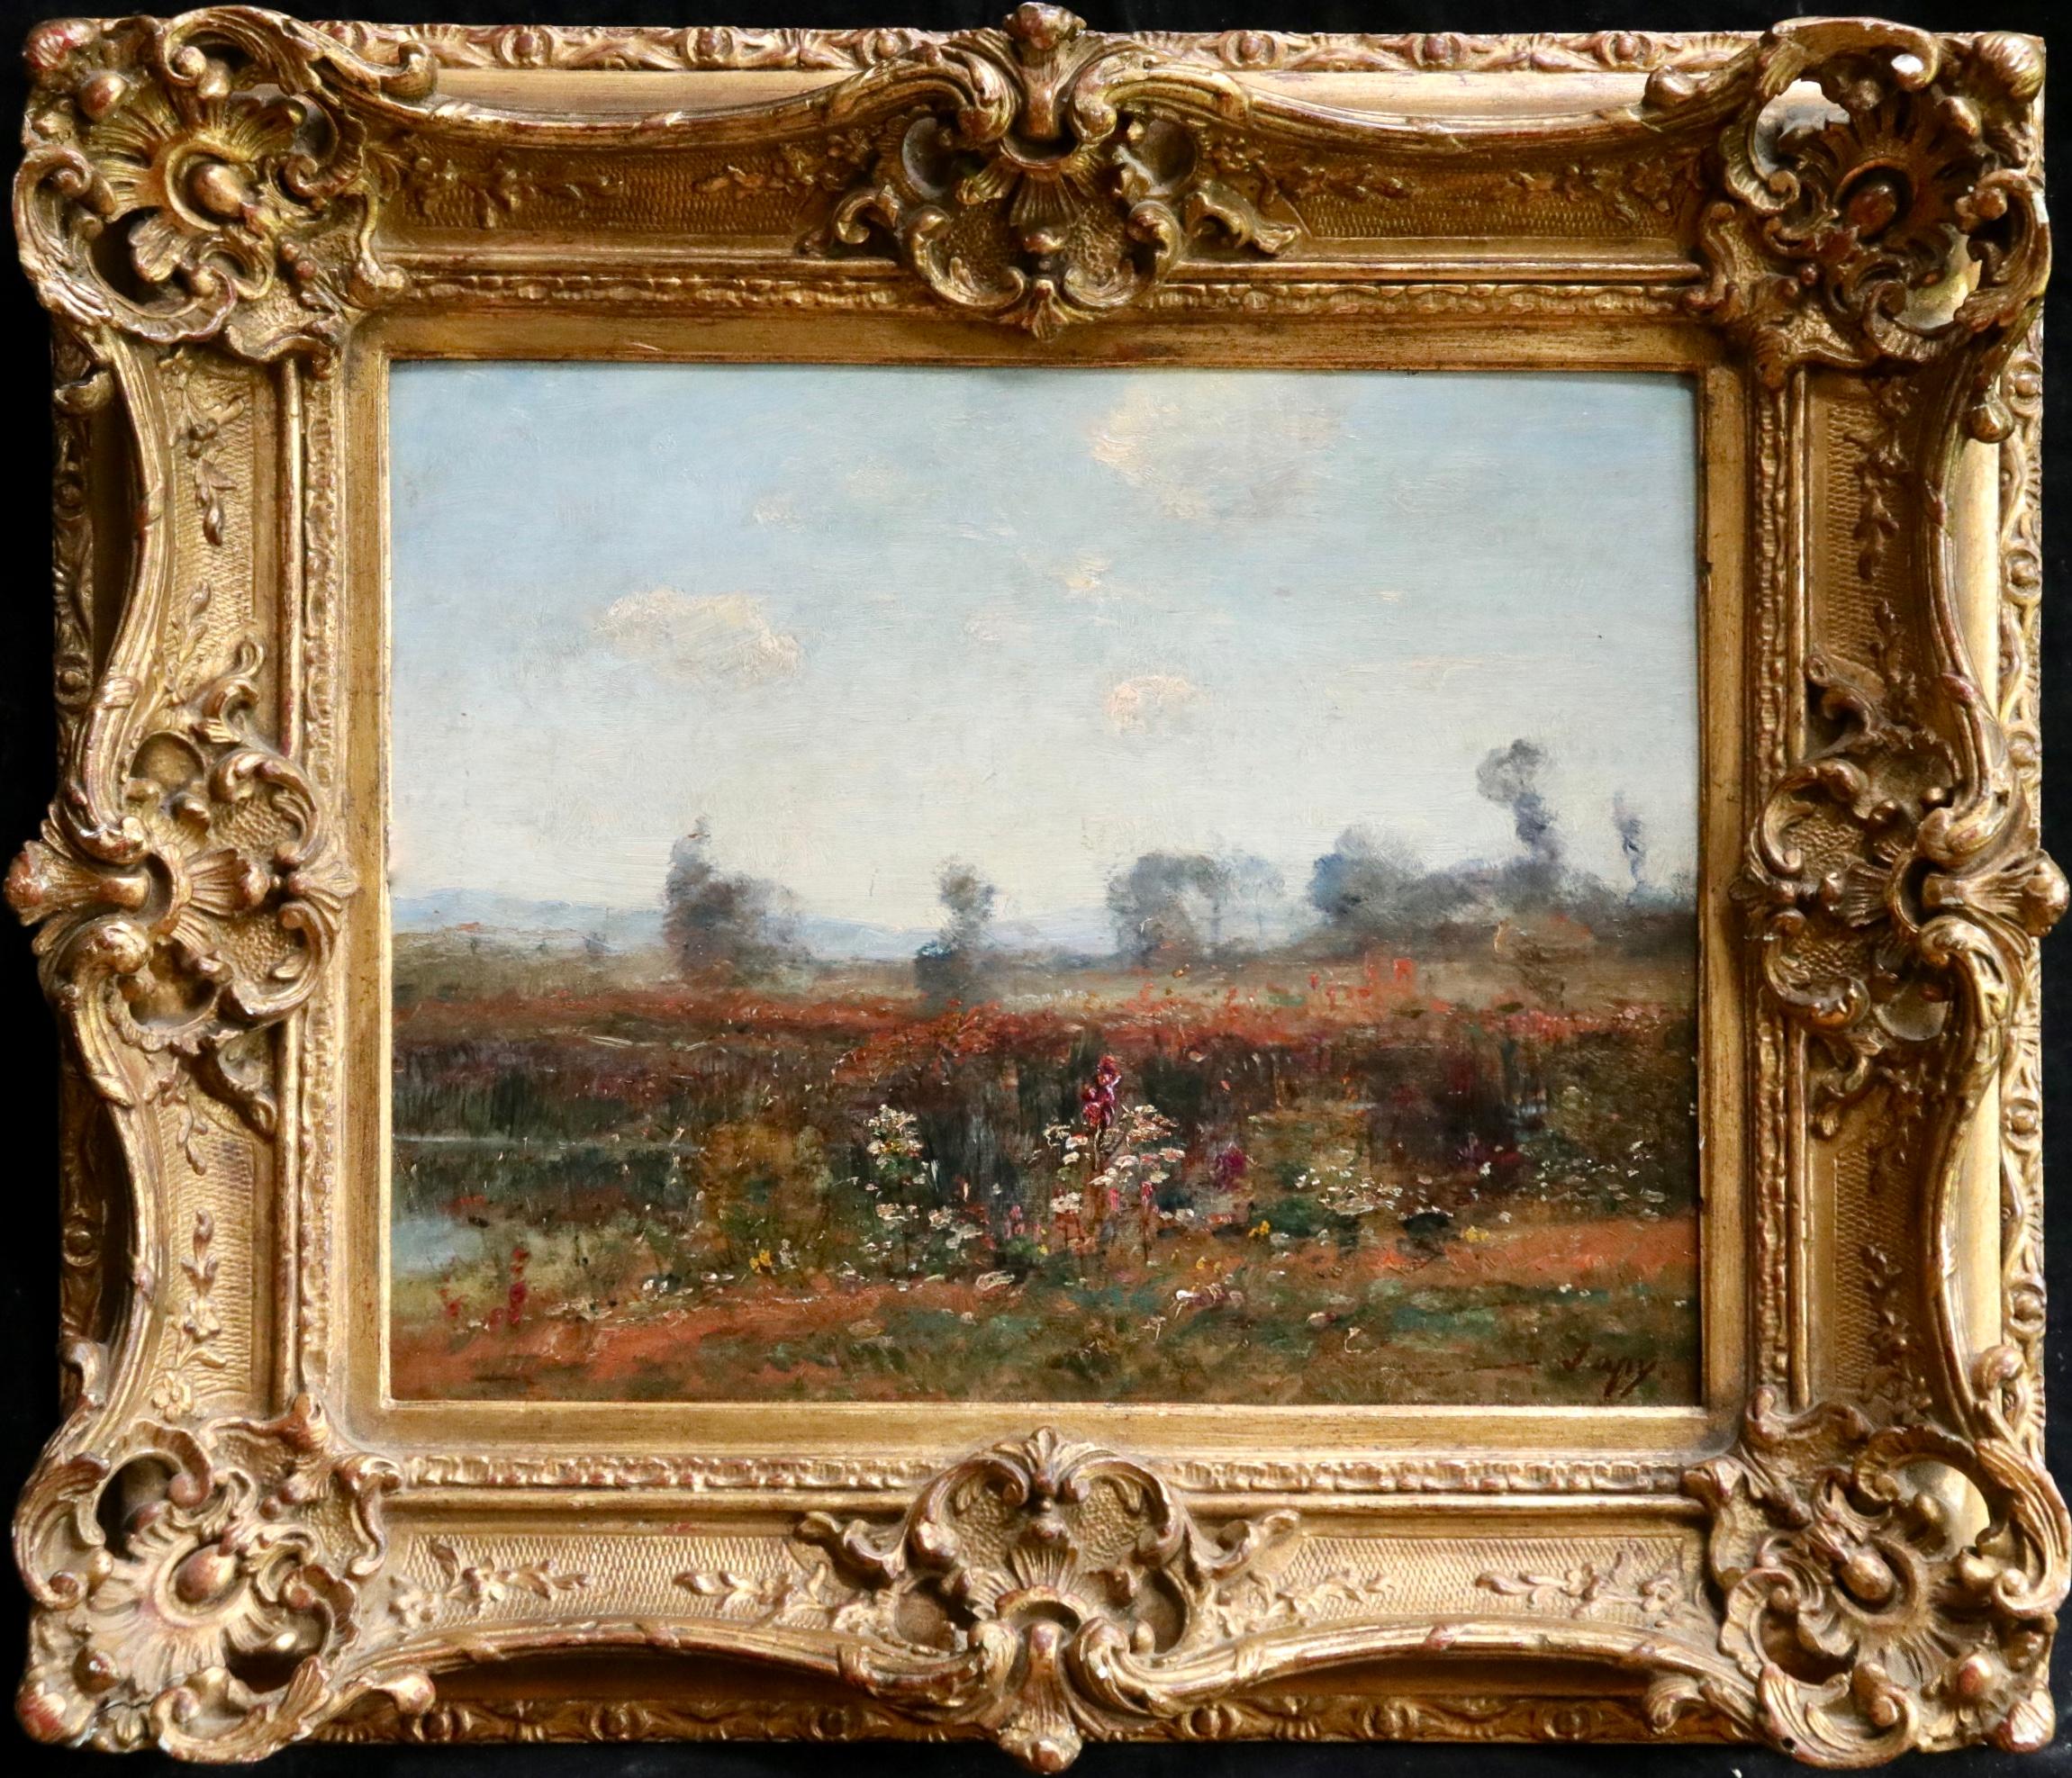 Wildflowers by the River - 19th Century Oil Barbizon Landscape - Louis Aime Japy - Painting by Louis Aimé Japy